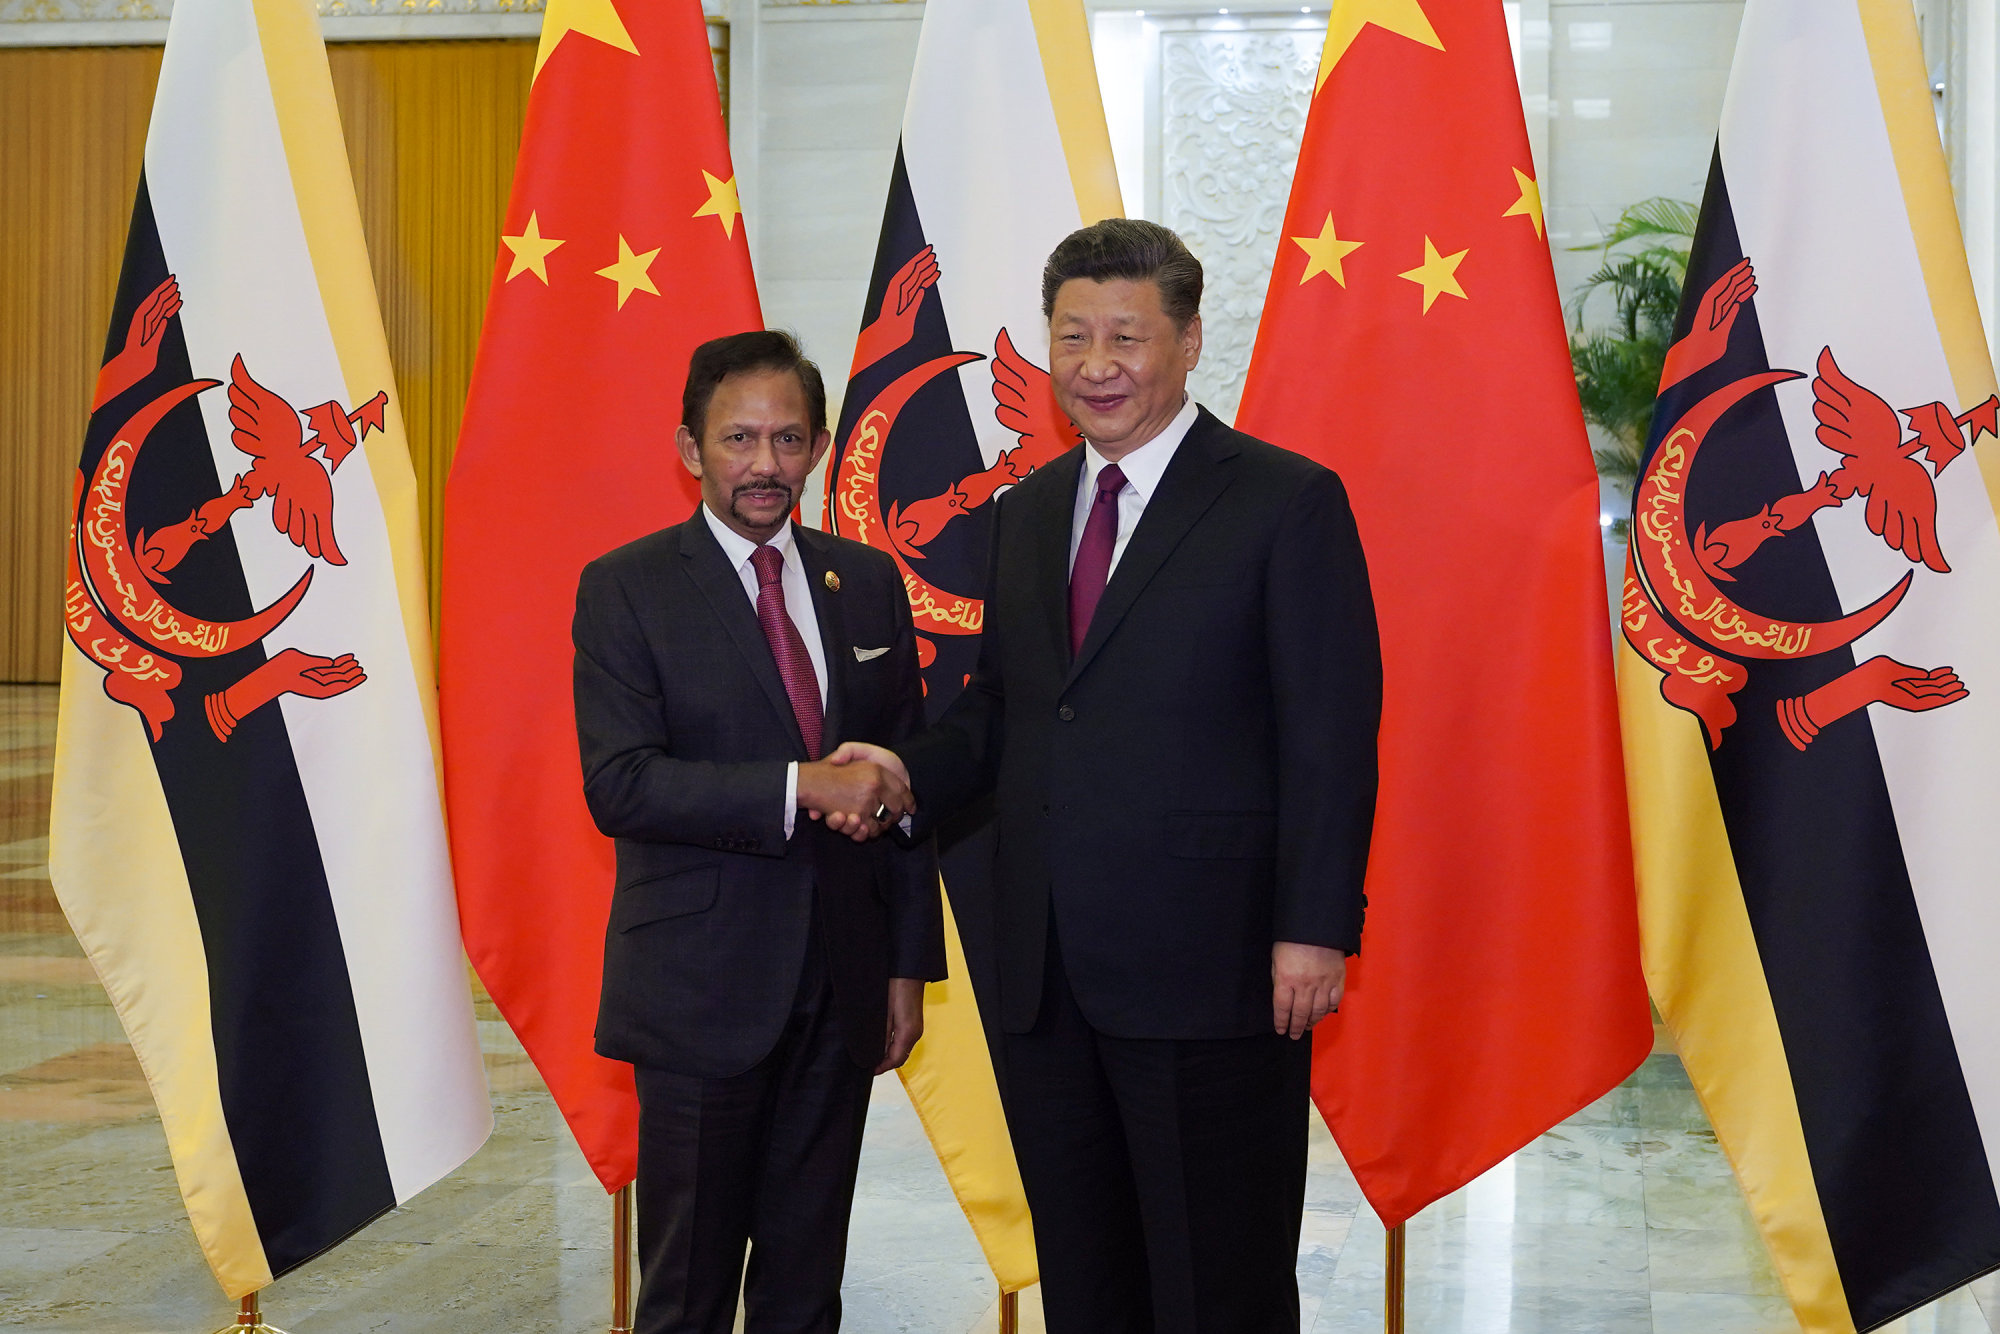 Chinese President Xi Jinping (right) shakes hands with Brunei Sultan Hassanal Bolkiah before the bilateral meeting of the Second Belt and Road Forum at the Great Hall of the People on April 26 in Beijing. | REUTERS